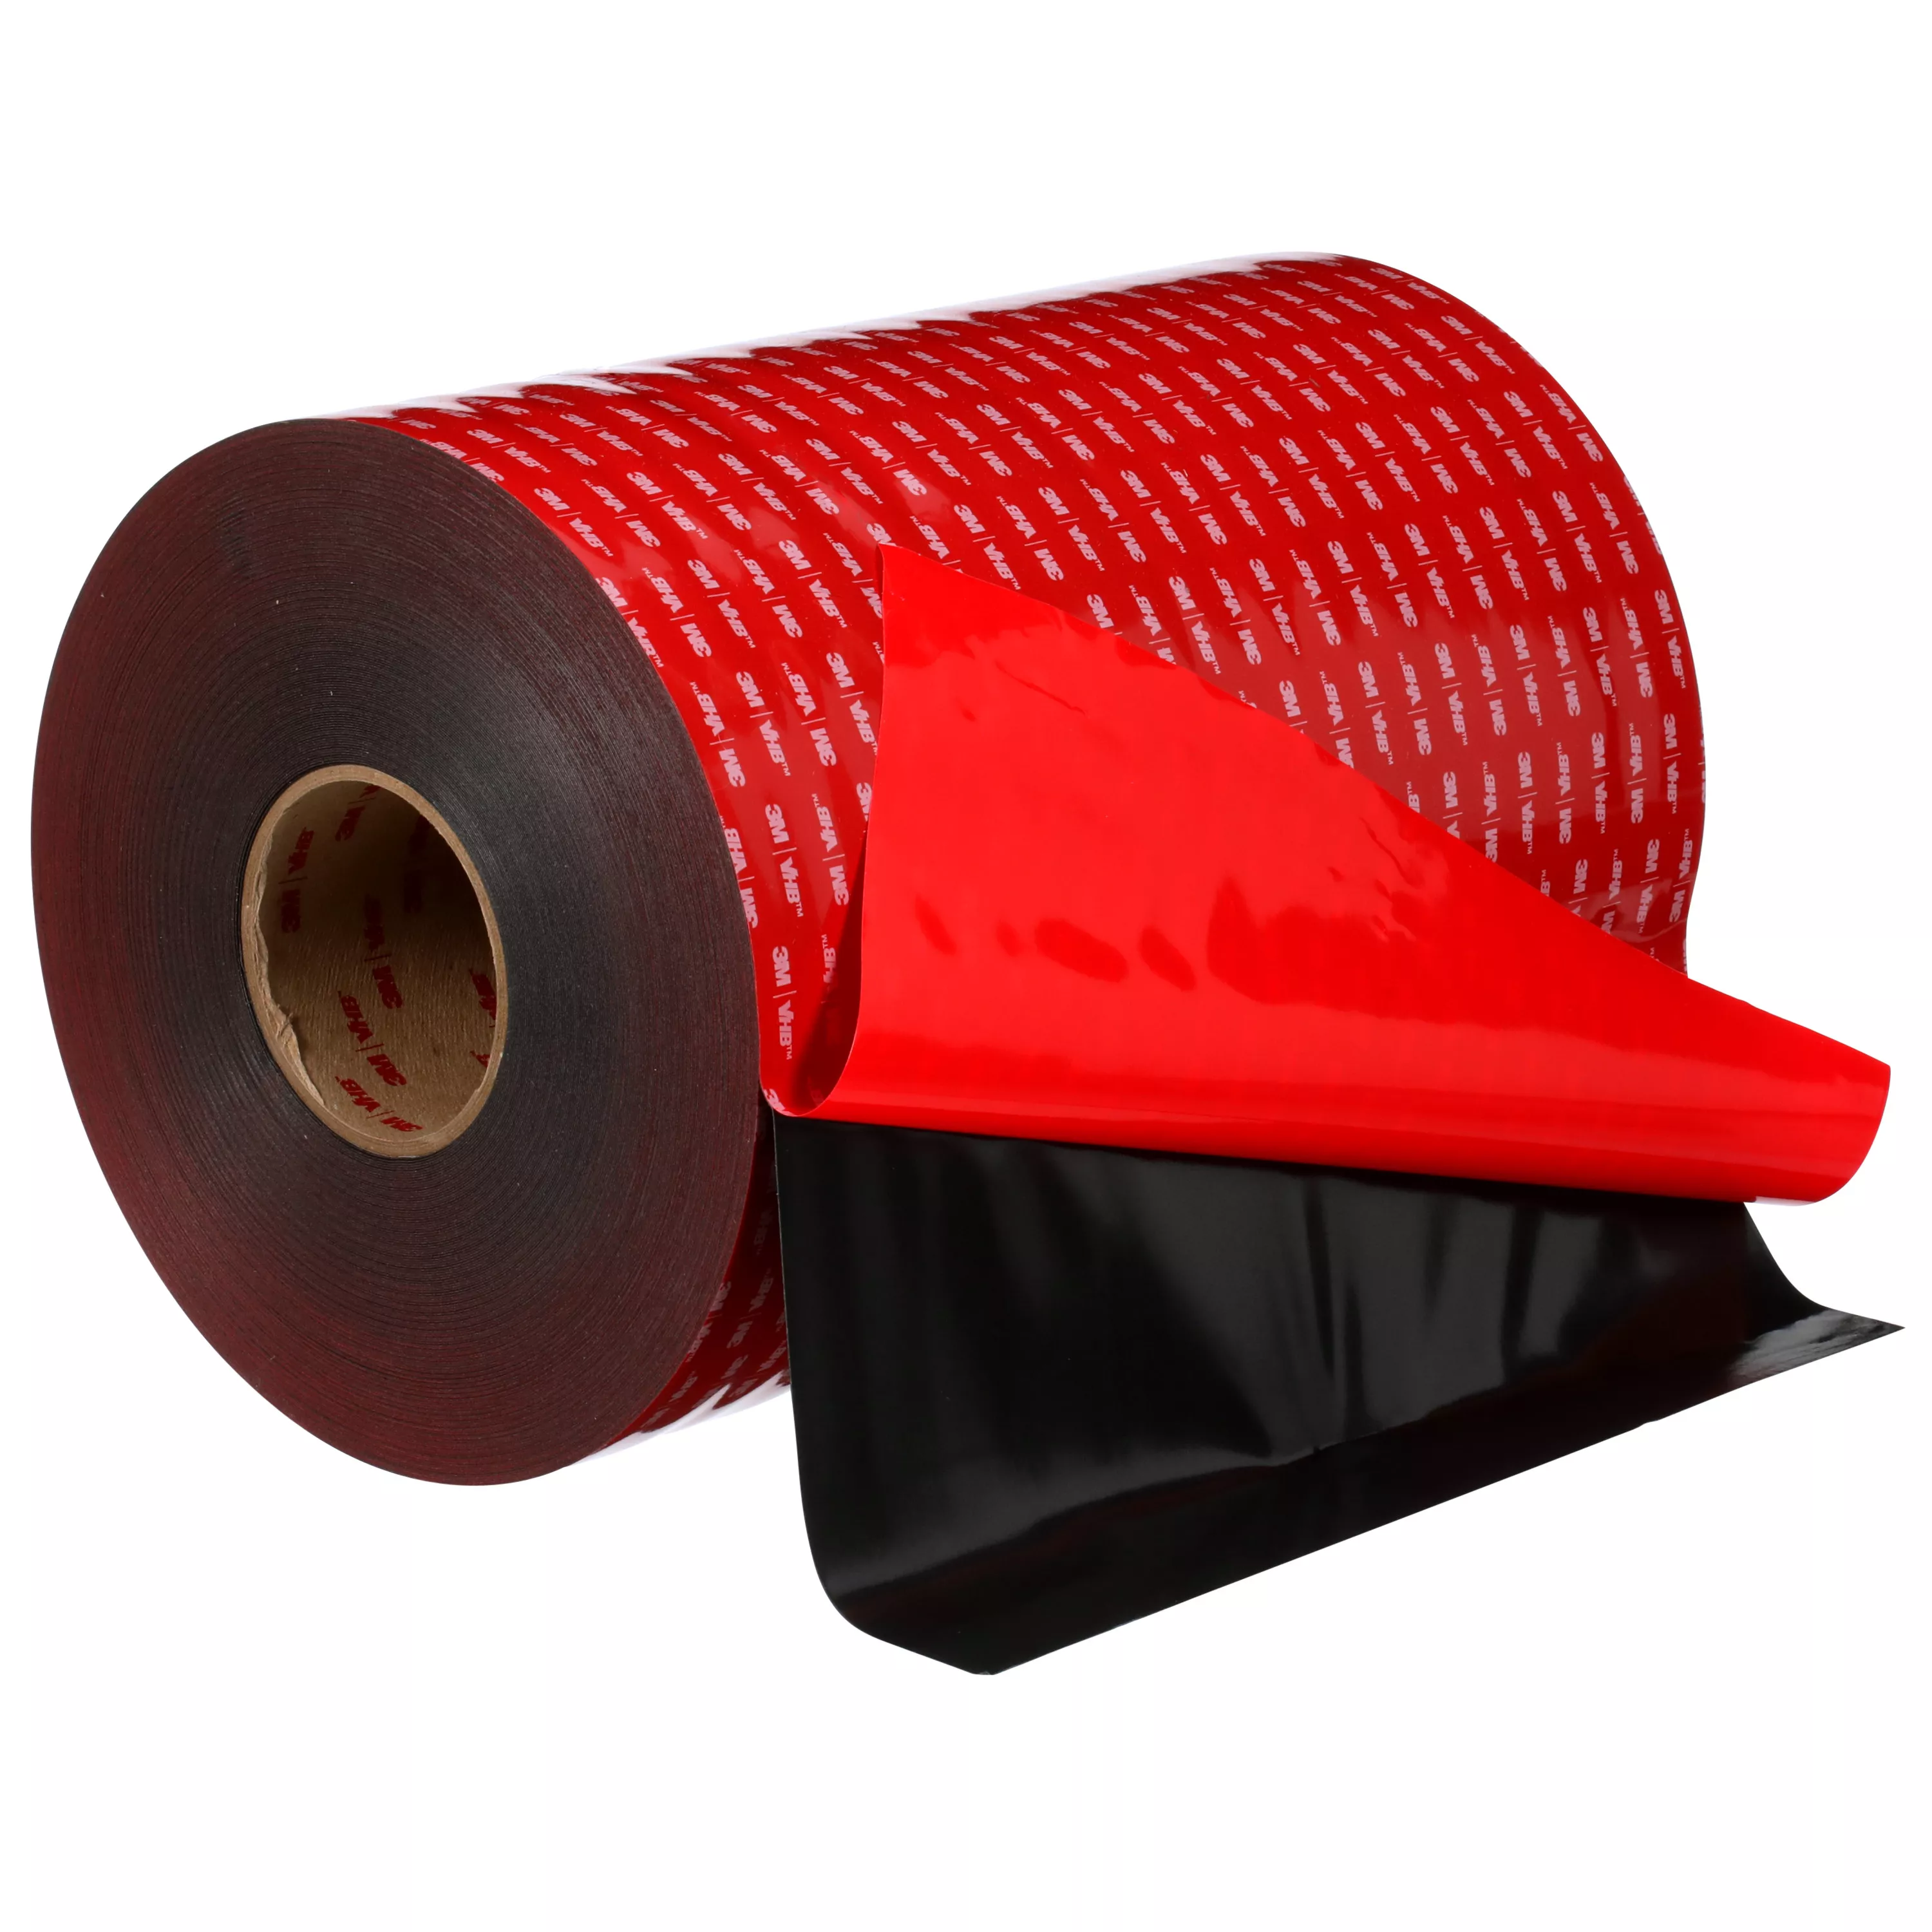 Product Number 5930 | 3M™ VHB™ Tape 5930